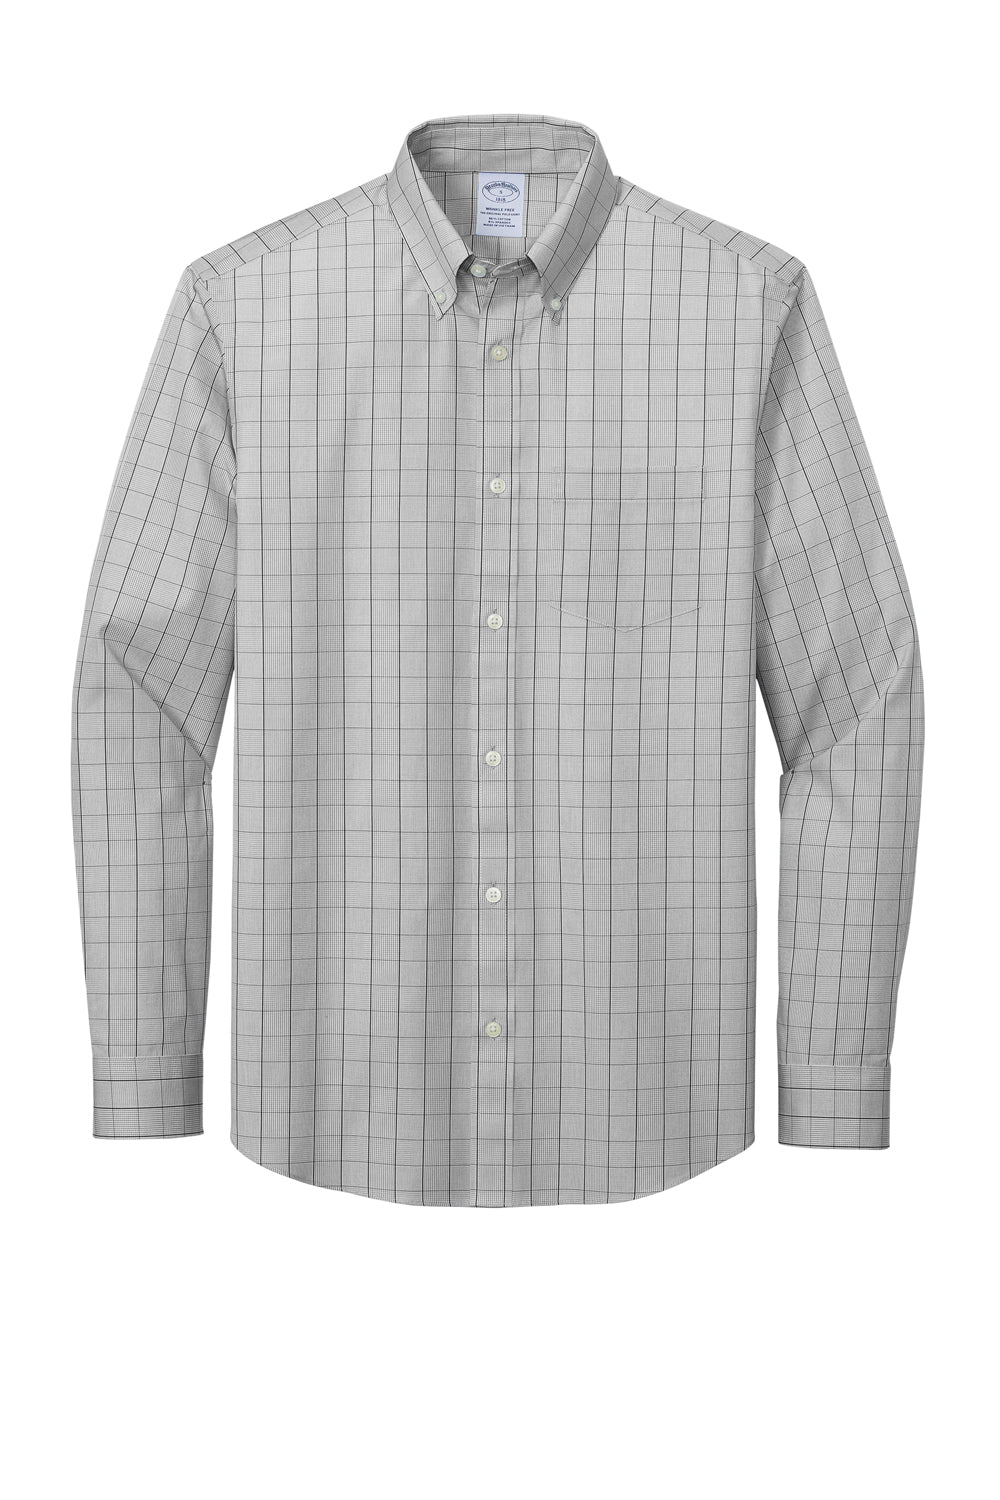 Brooks Brothers Mens Wrinkle Resistant Long Sleeve Button Down Shirt w/ Pocket Shadow Grey Flat Front